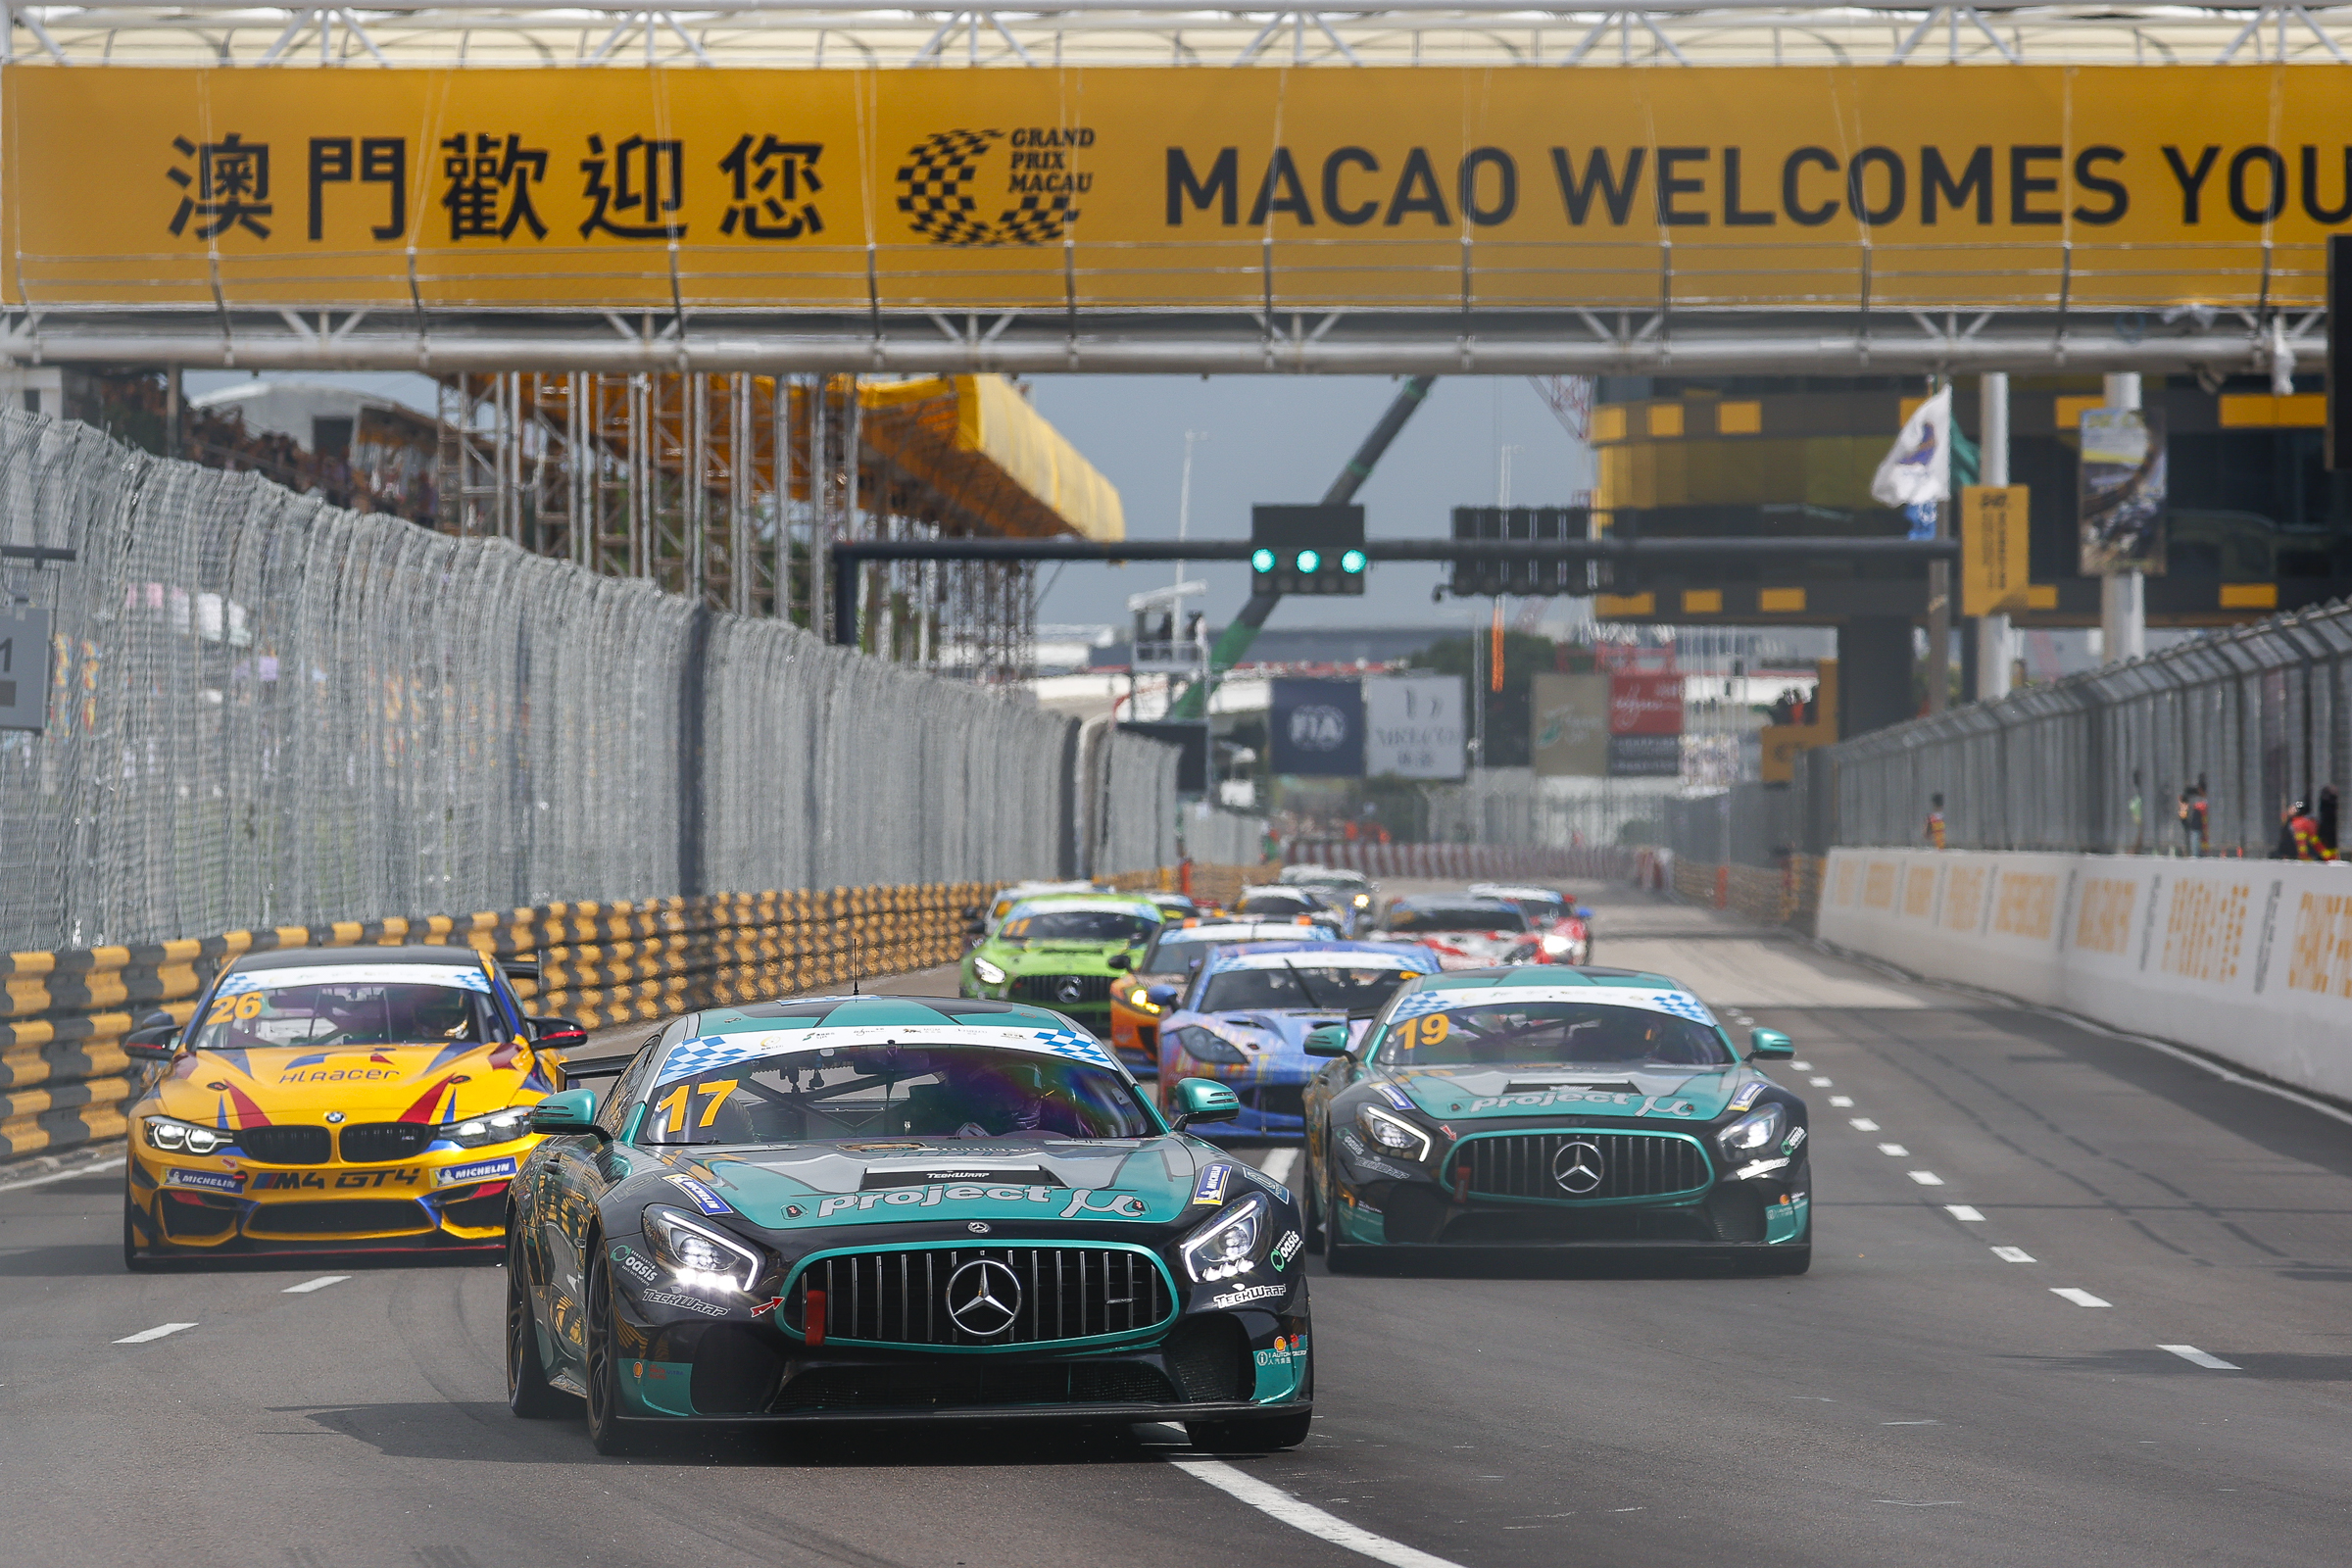 The 70th Macau Grand Prix kicked off on November 11, worldwide racers hit the track to compete.